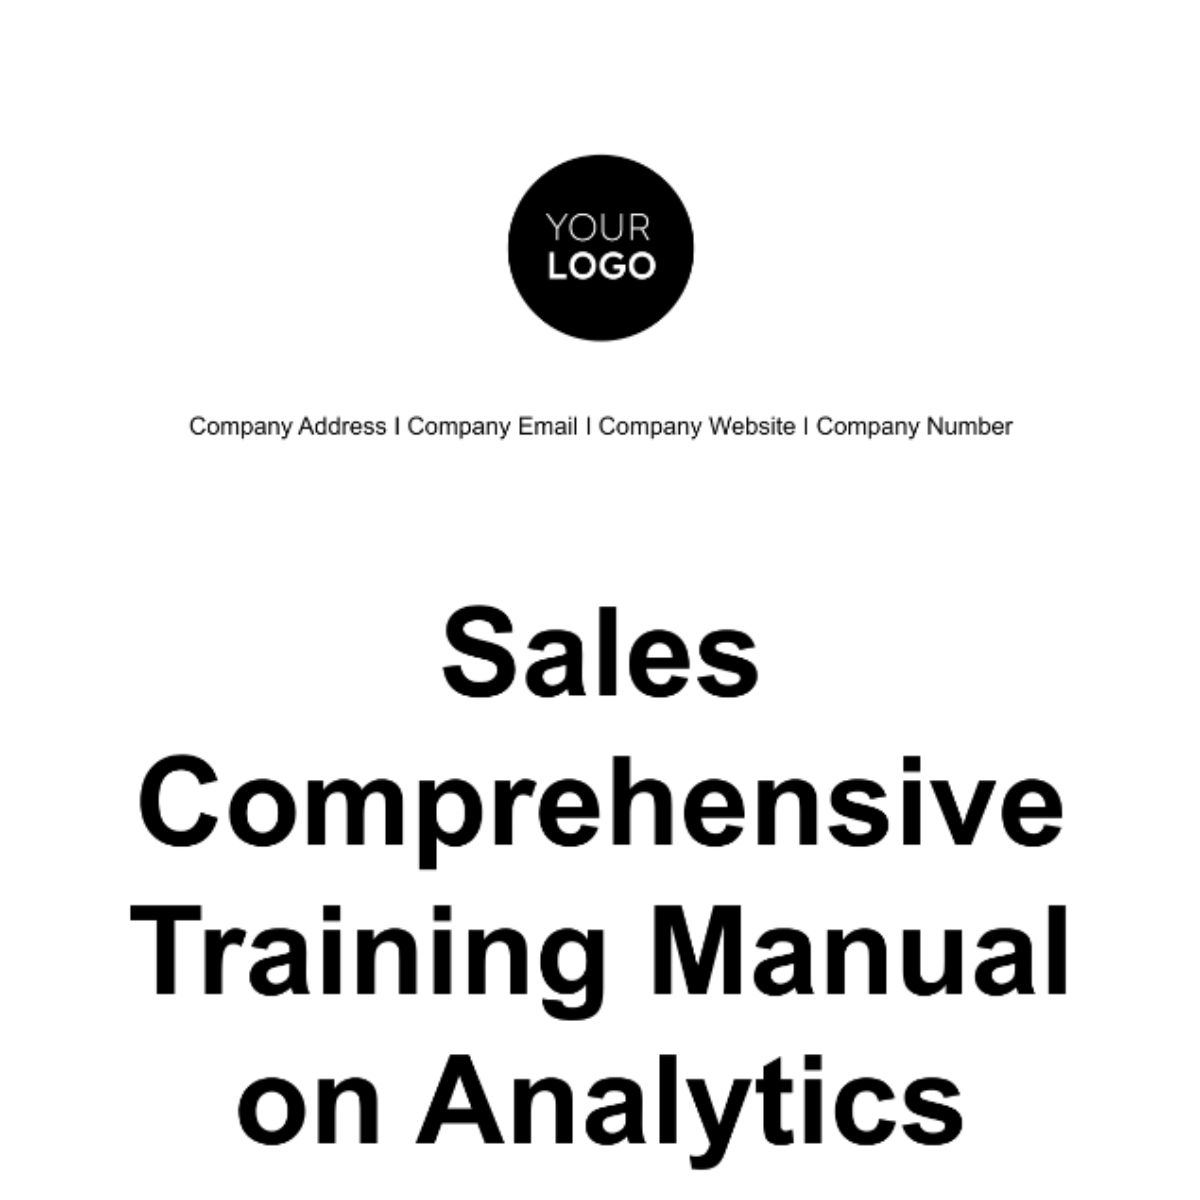 Sales Comprehensive Training Manual on Analytics Template